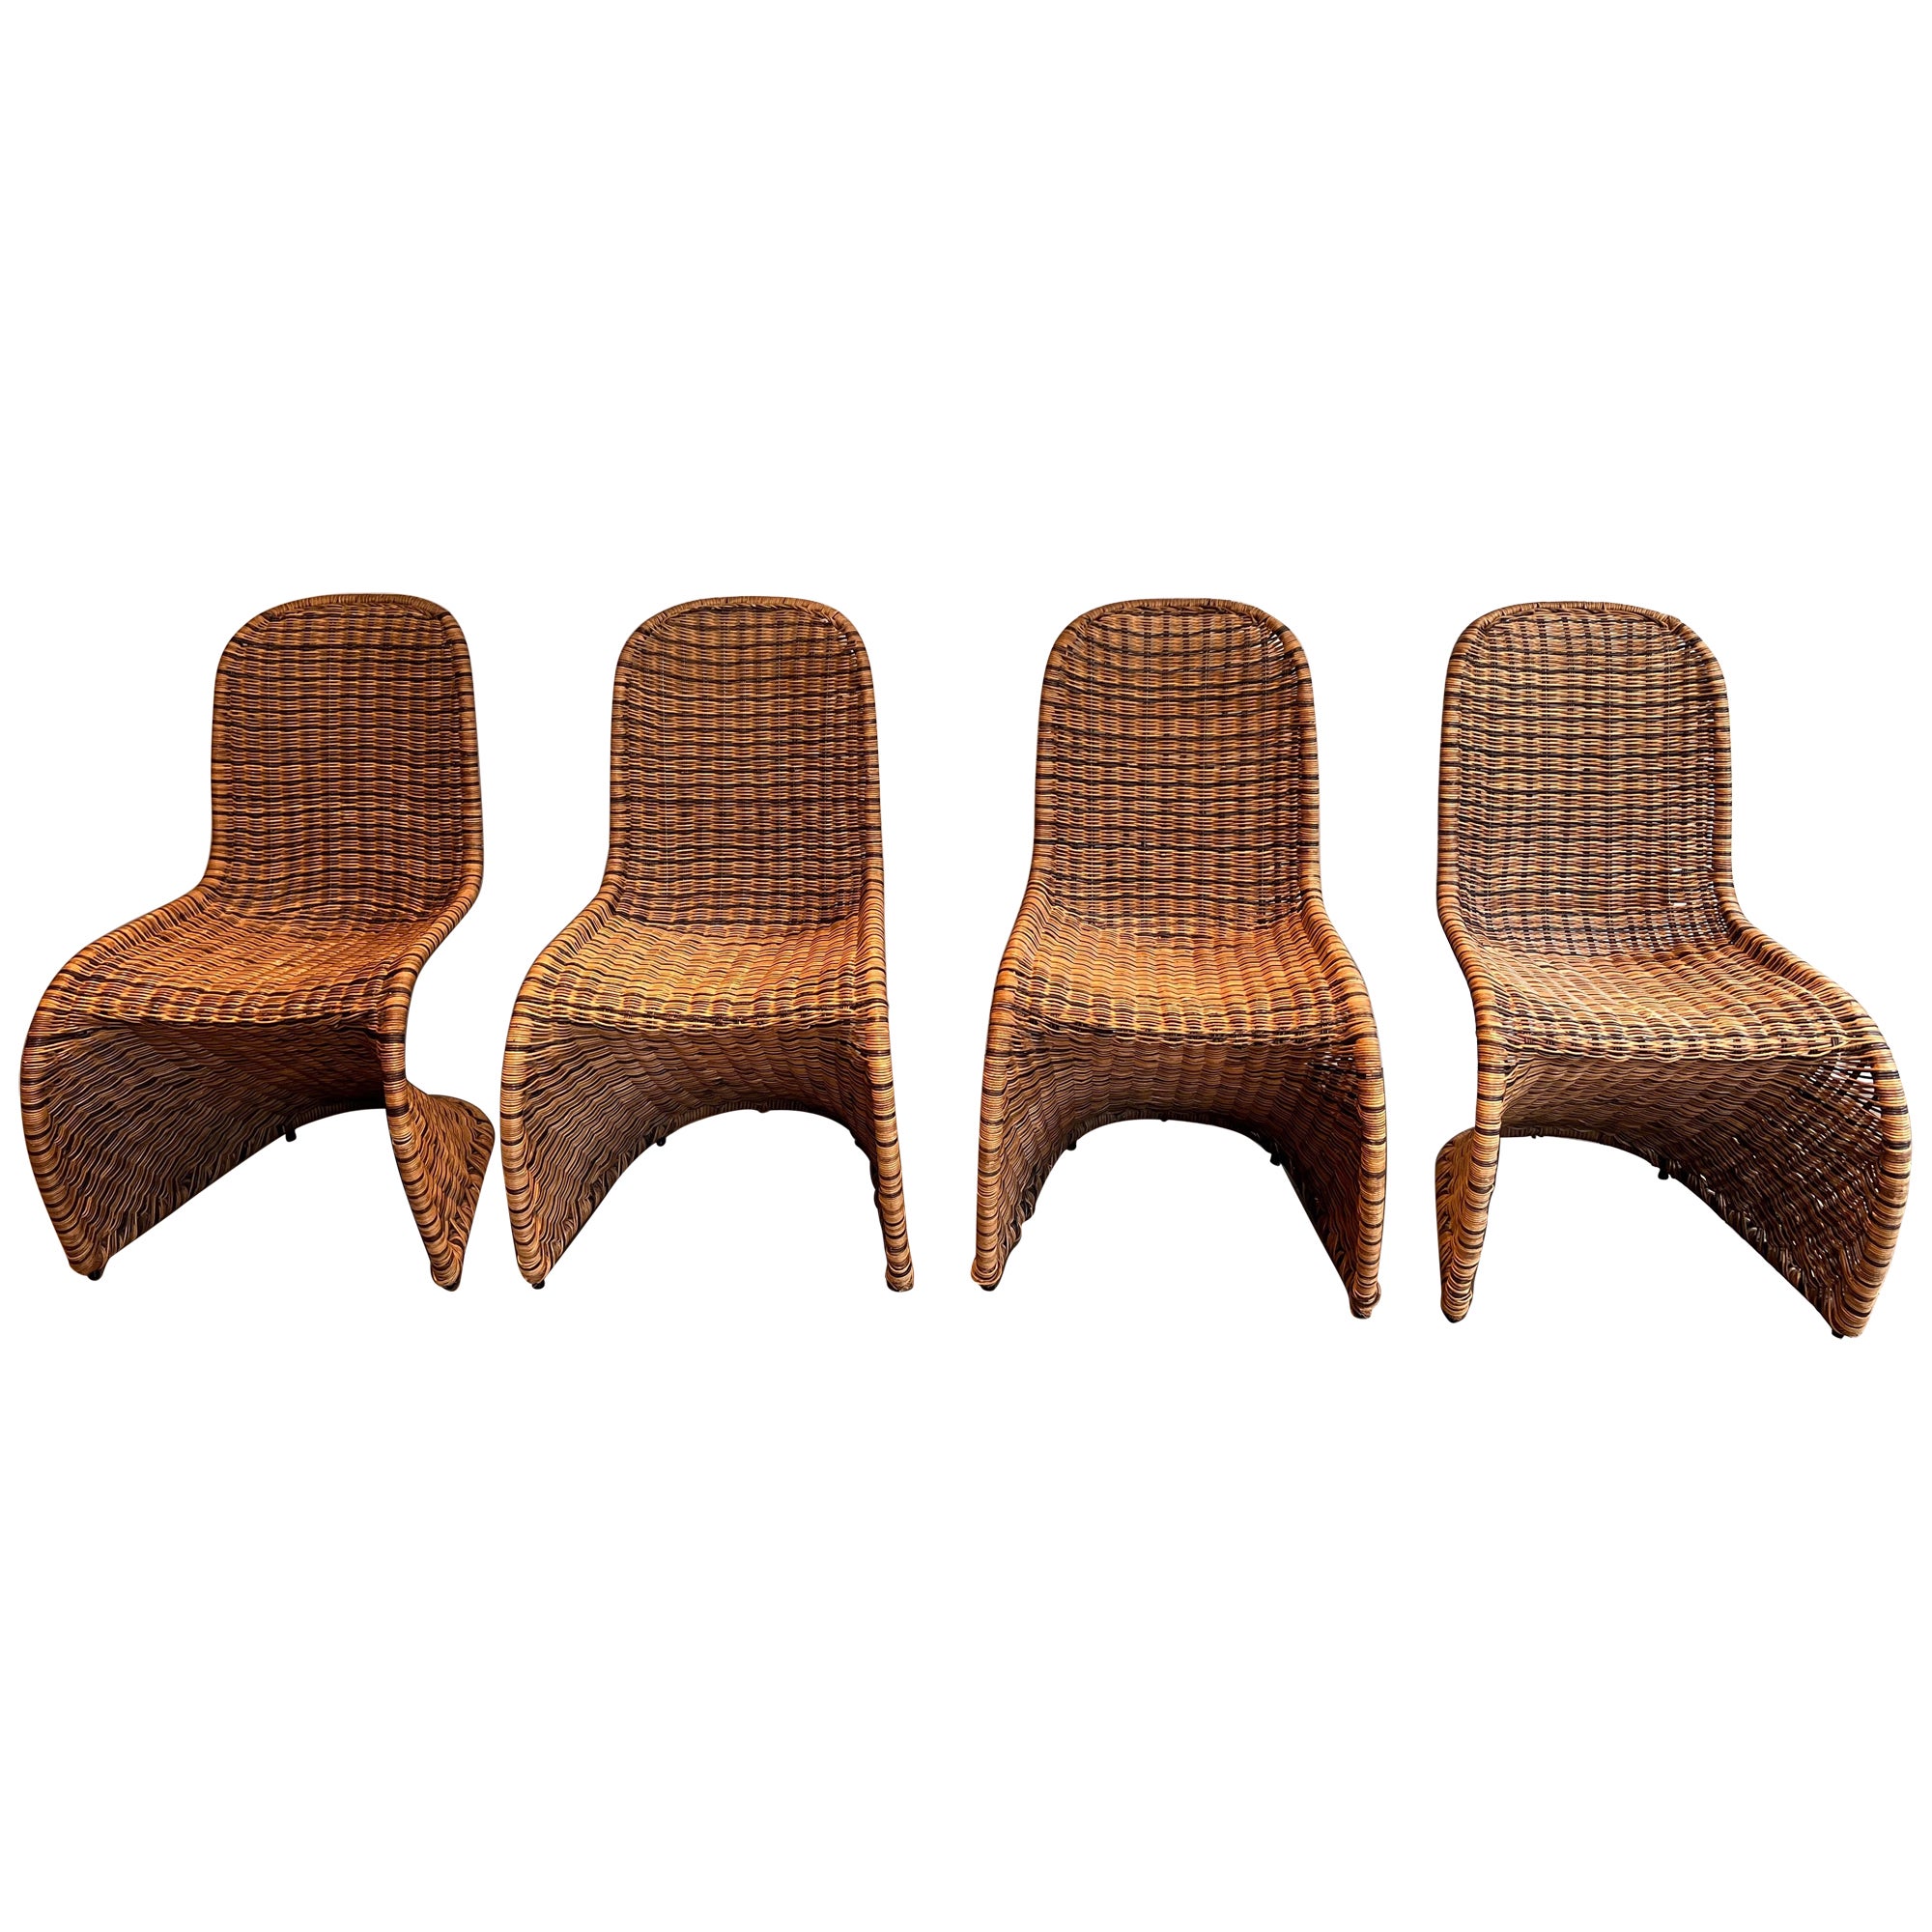 Set of Four Curved Rattan Chairs For Sale